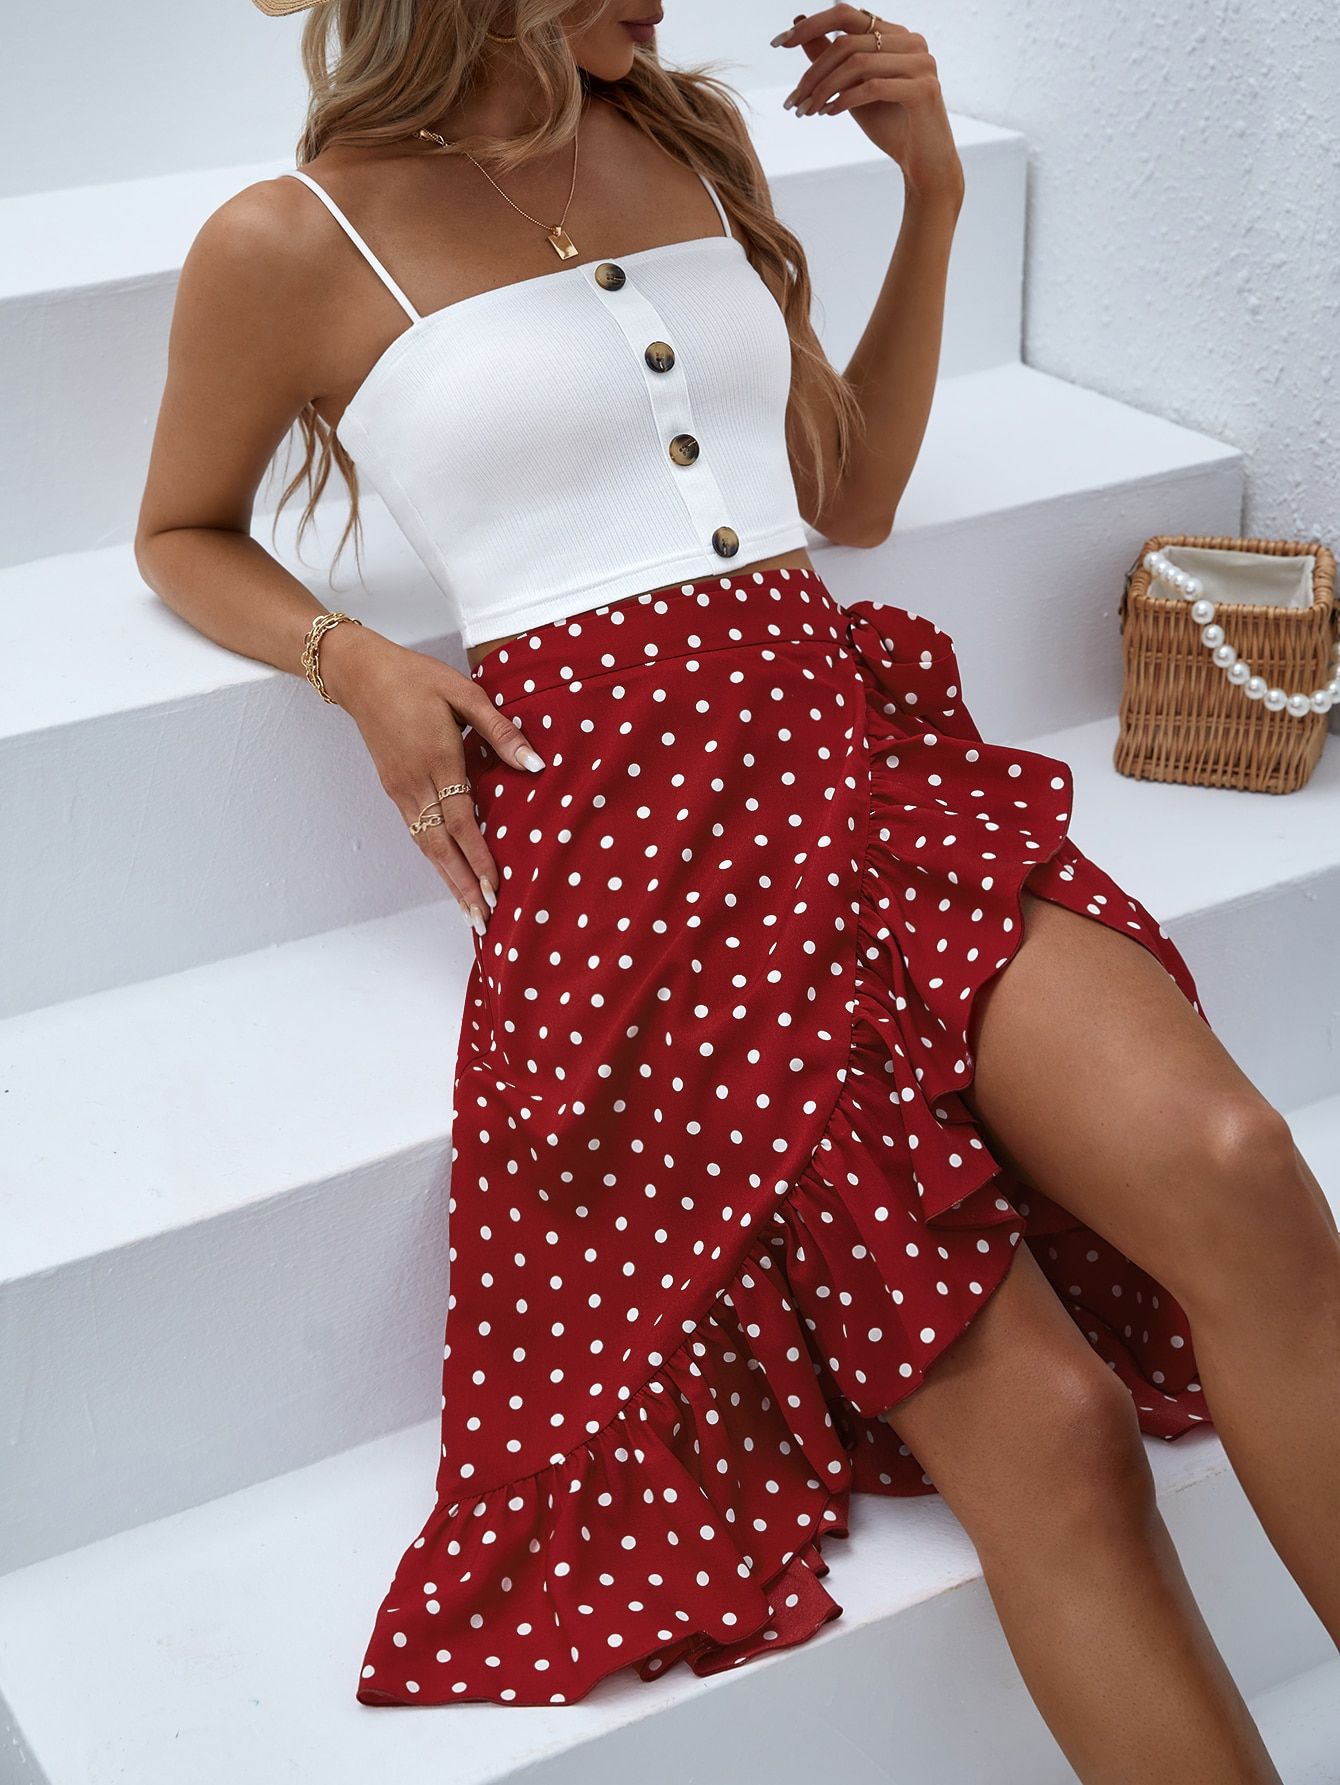 Look cute with the red and white polka
dot skirt